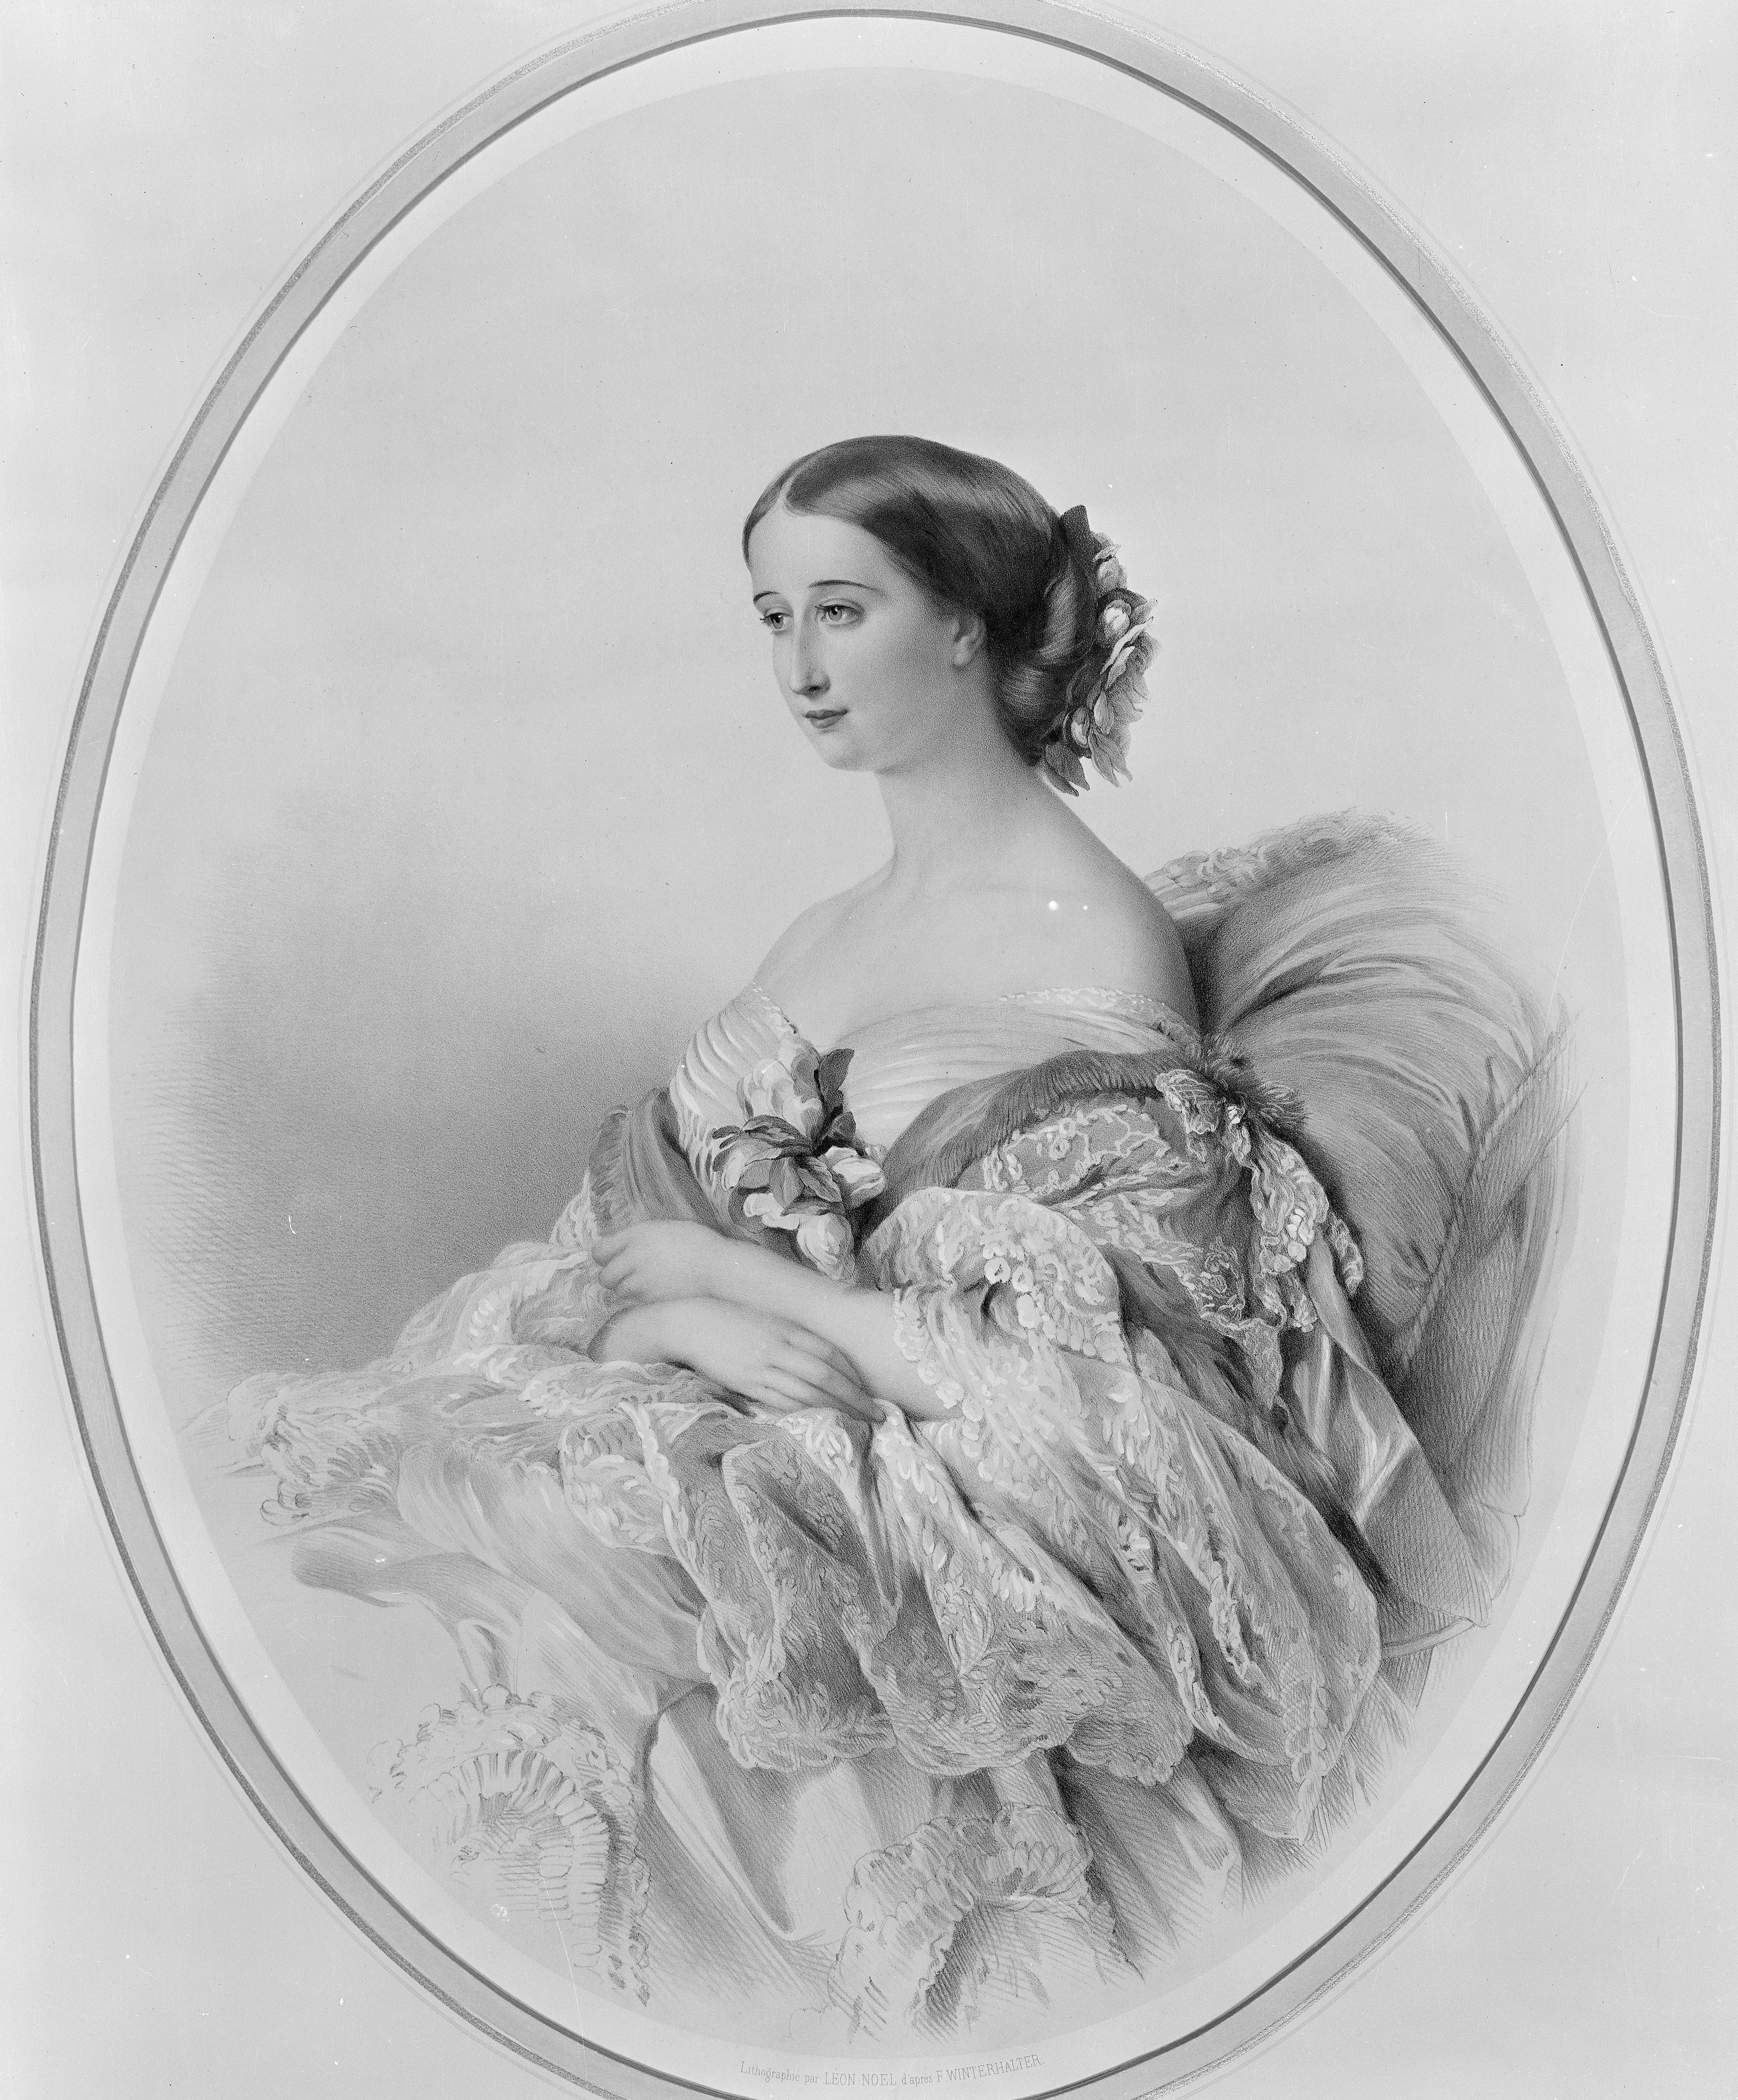 Portrait of Empress Eugenie by Painting by Franz Xaver